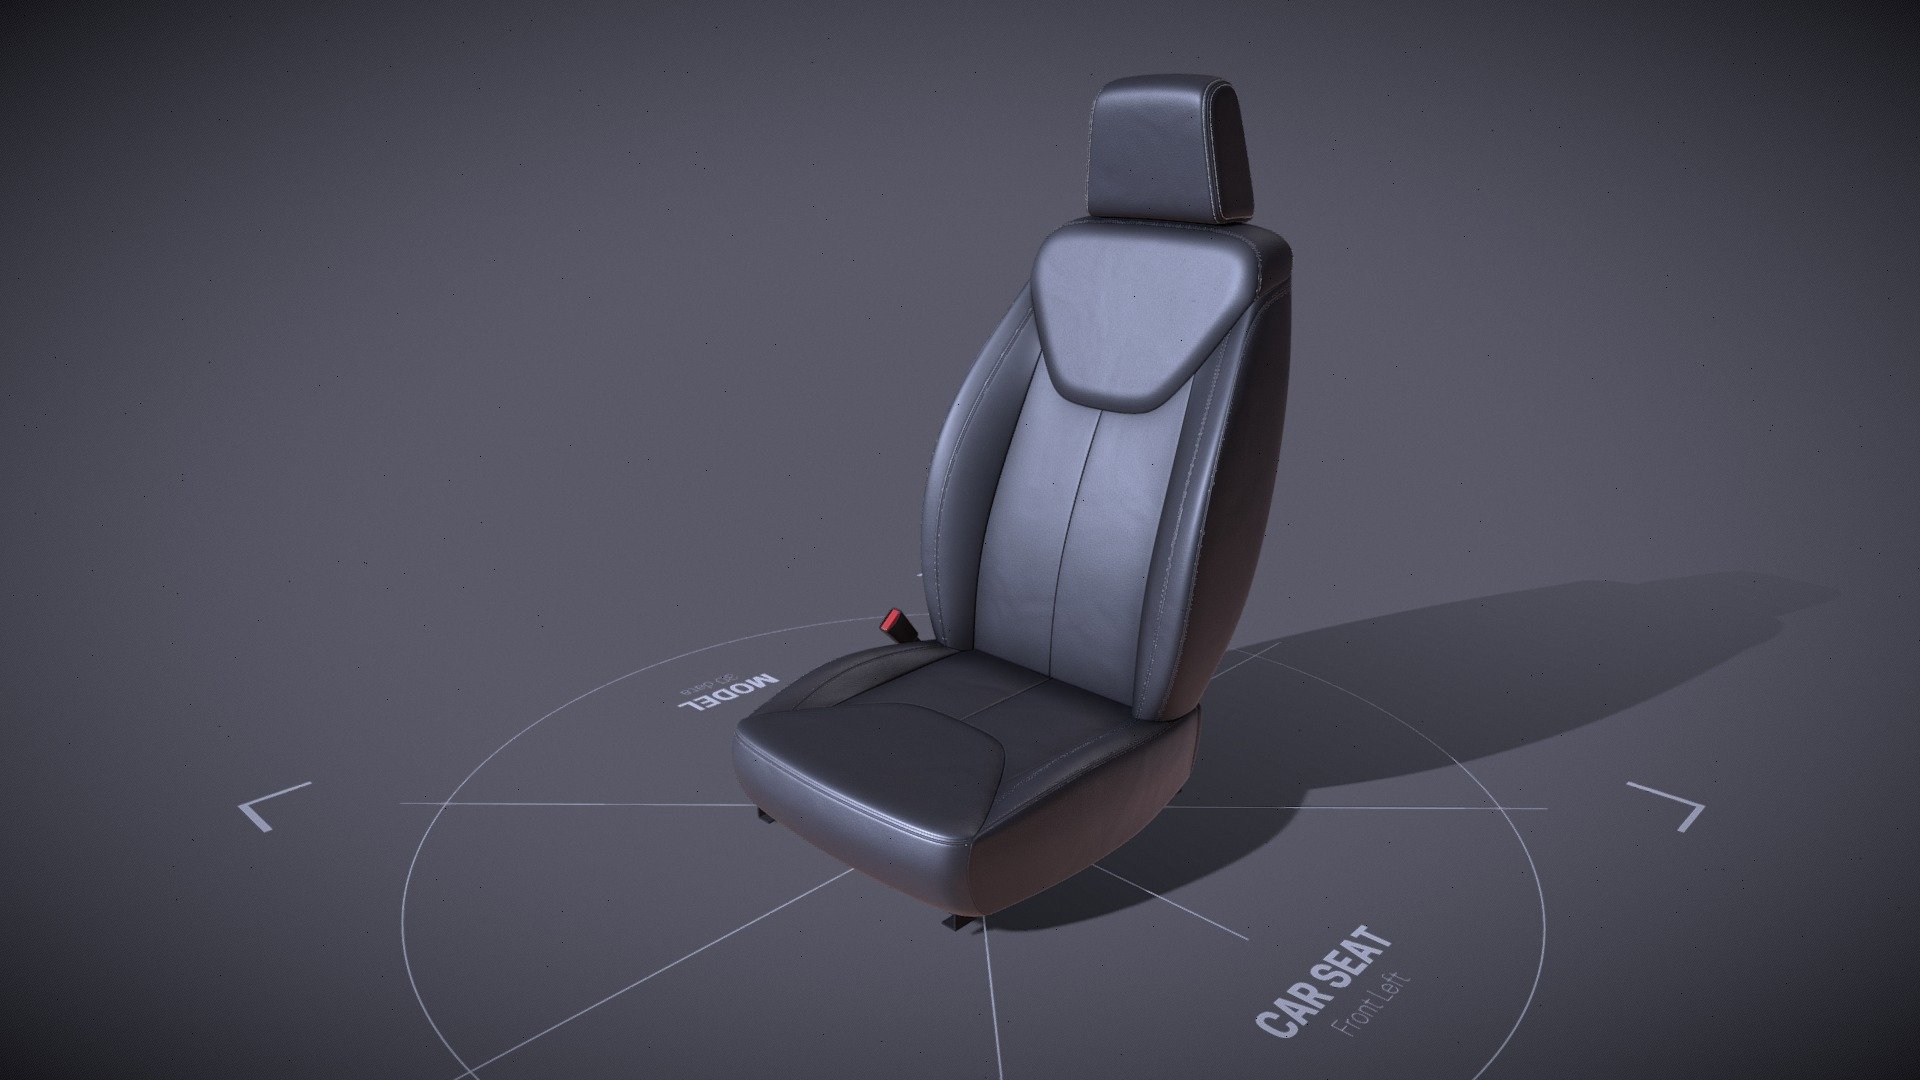 Front car seat. 
Highly detailed 3d model ready for use in any 3D software. Also prepared for 3D print, it is high density closed mesh 3d model